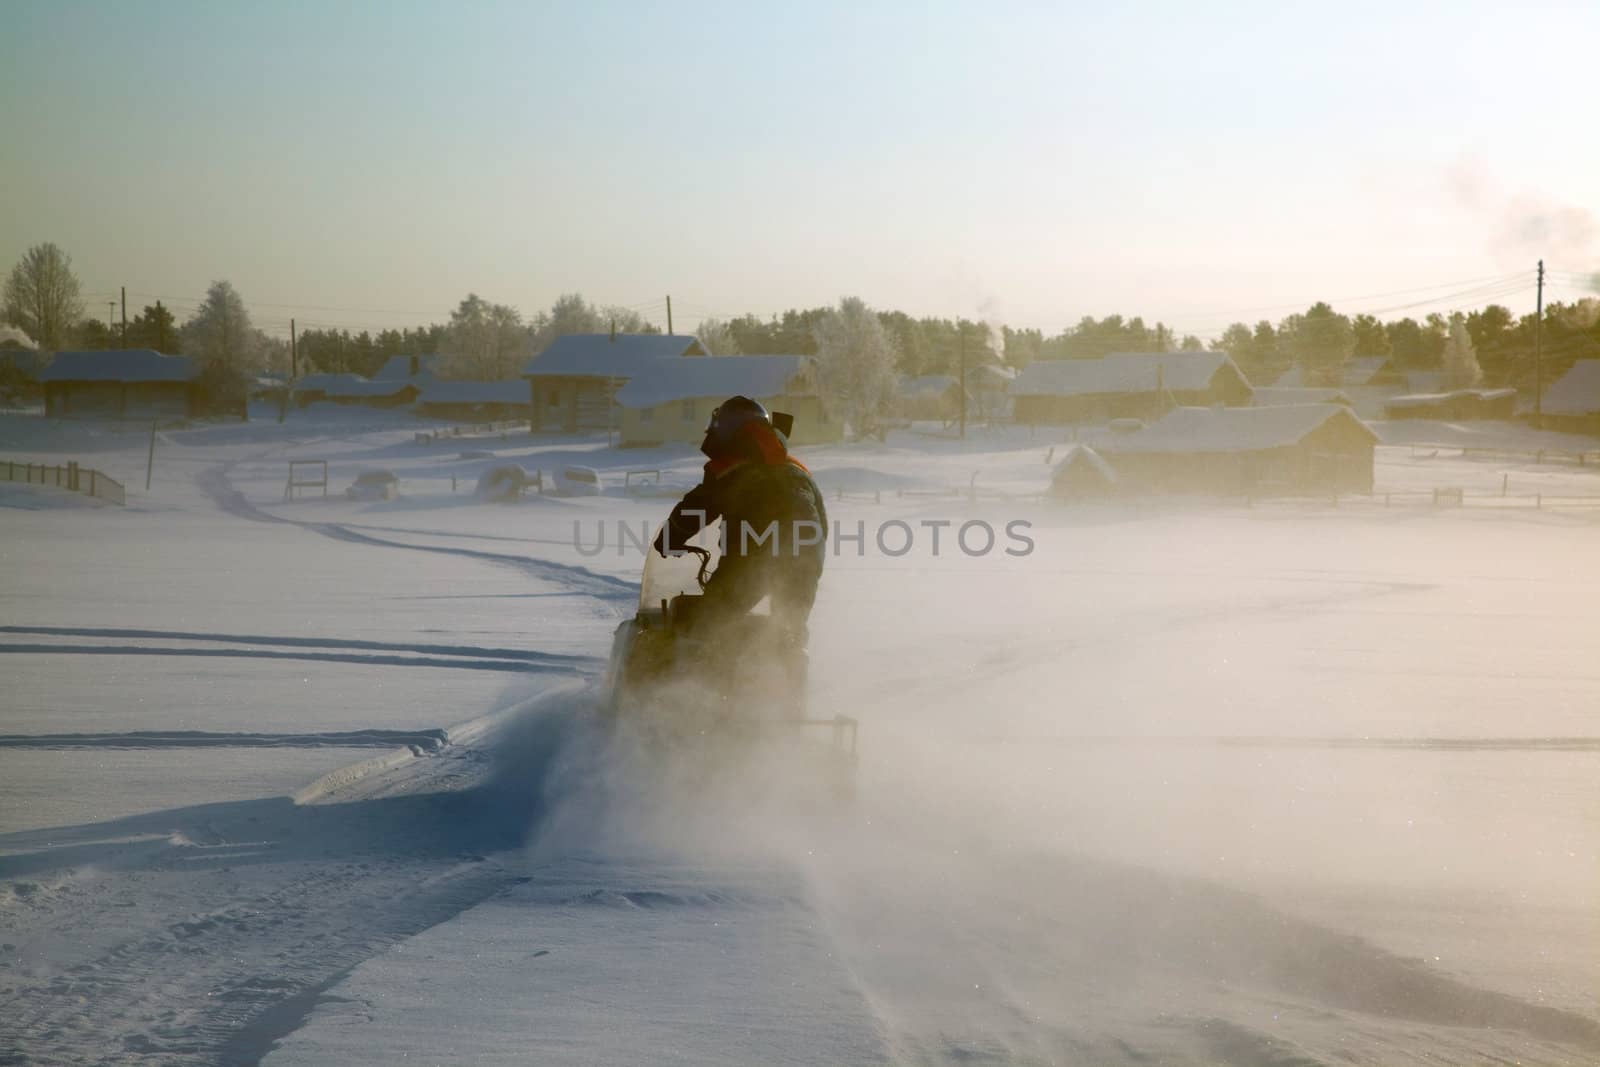 Snowmobile at full speed. Winter landscape.